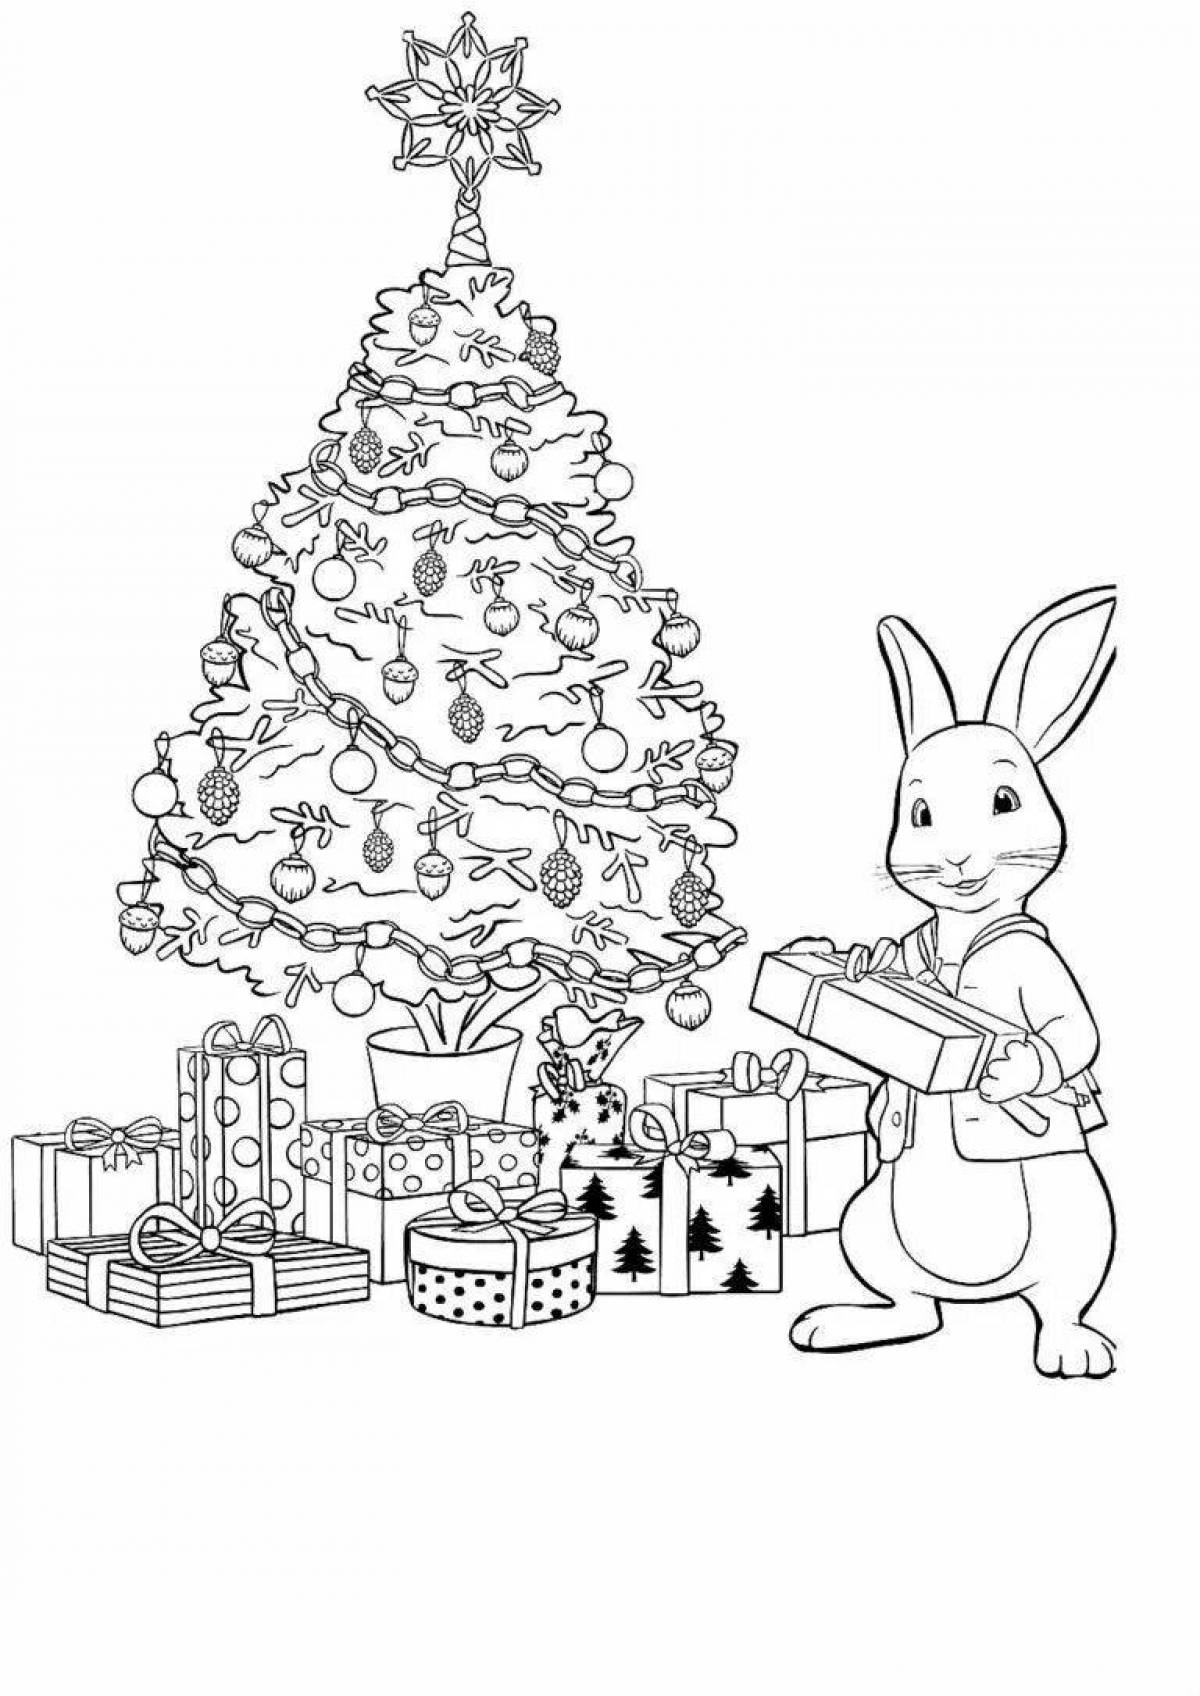 Energy coloring hare 2023 new year